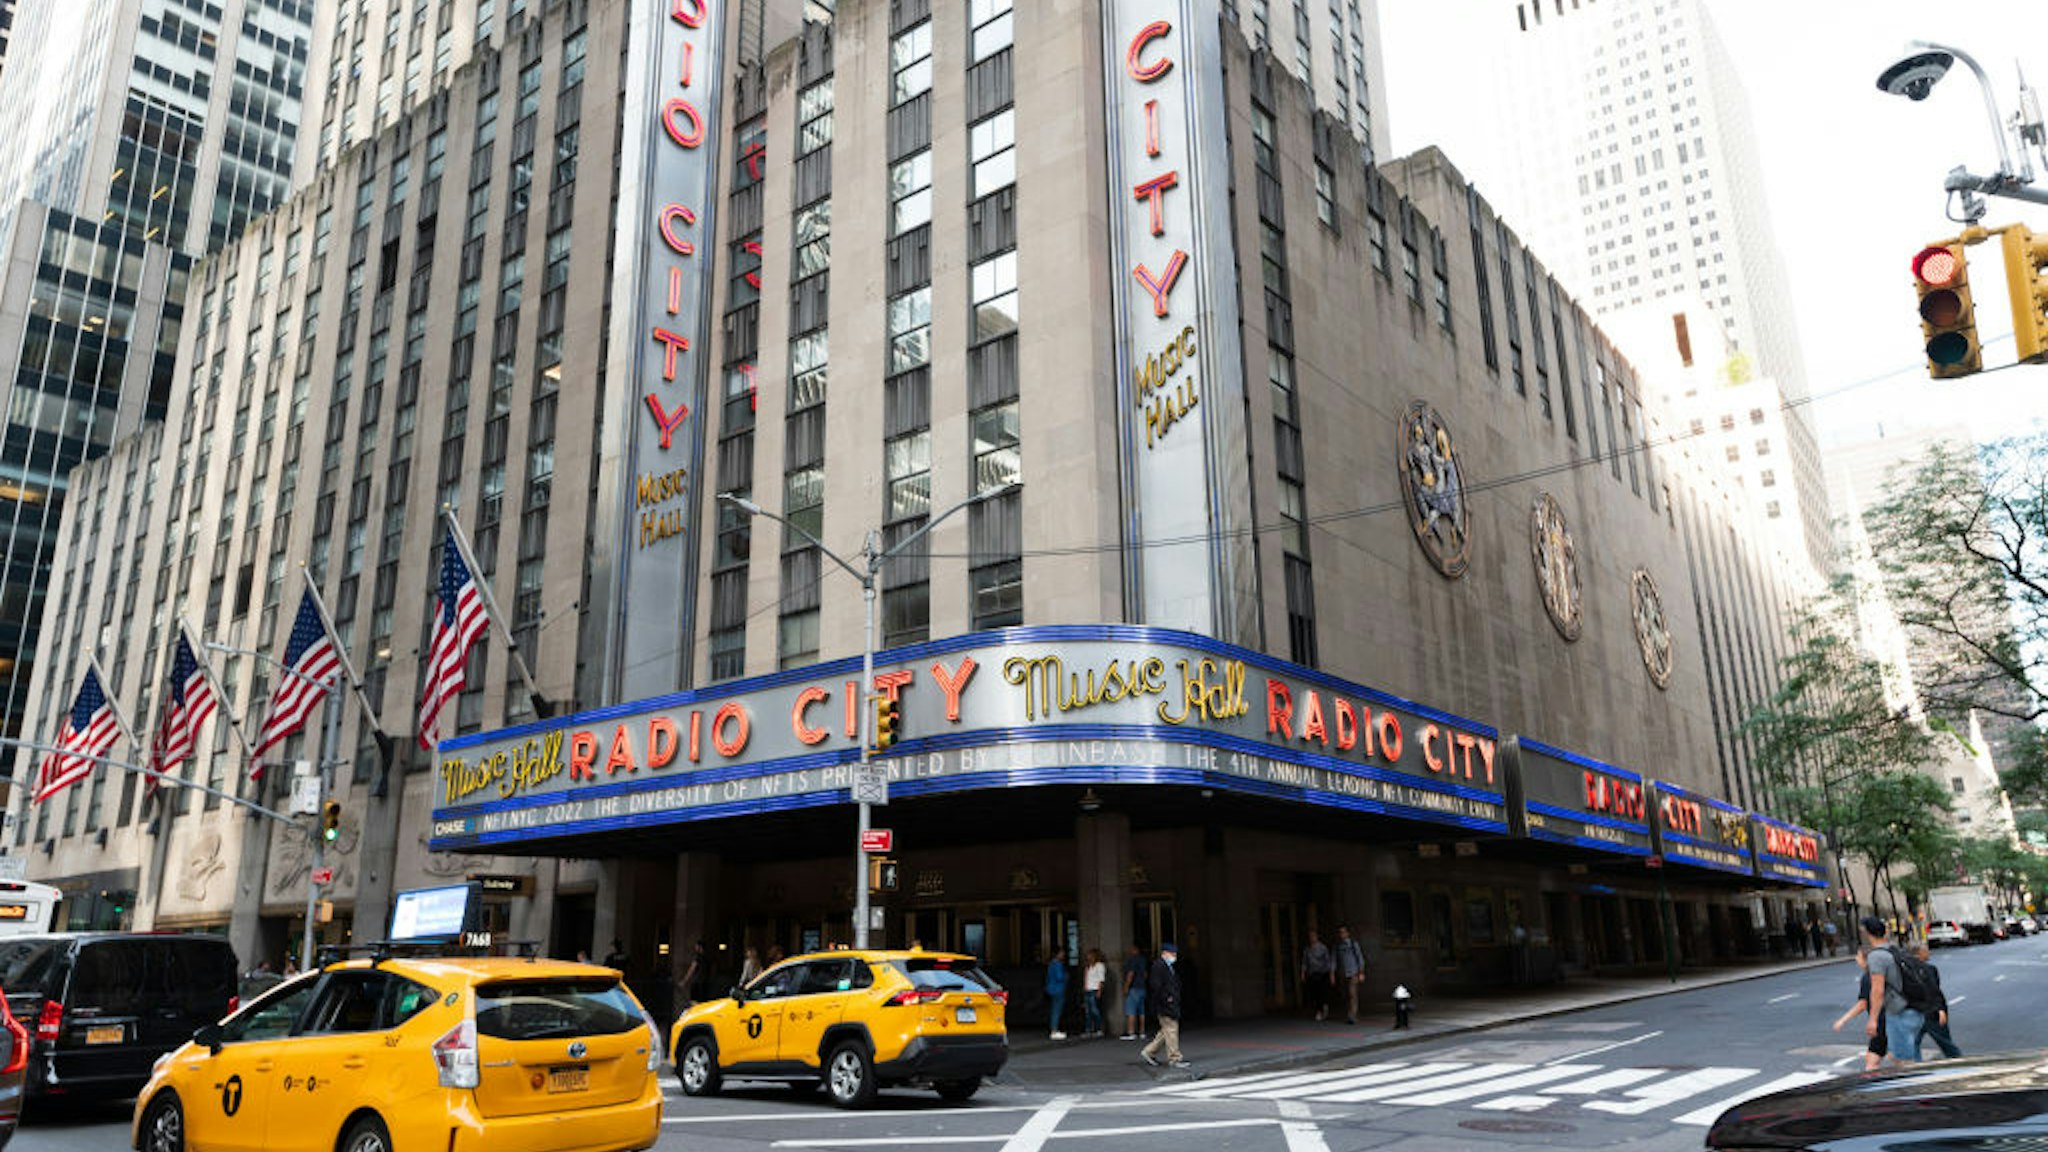 NEW YORK, NEW YORK - JUNE 20: A view outside Radio City Music Hall during the 4th annual NFT.NYC conference on June 20, 2022 in New York City. The four-day event will feature 1,500 speakers from the crypto and NFT space and will host over 14,000 attendees. (Photo by Noam Galai/Getty Images)